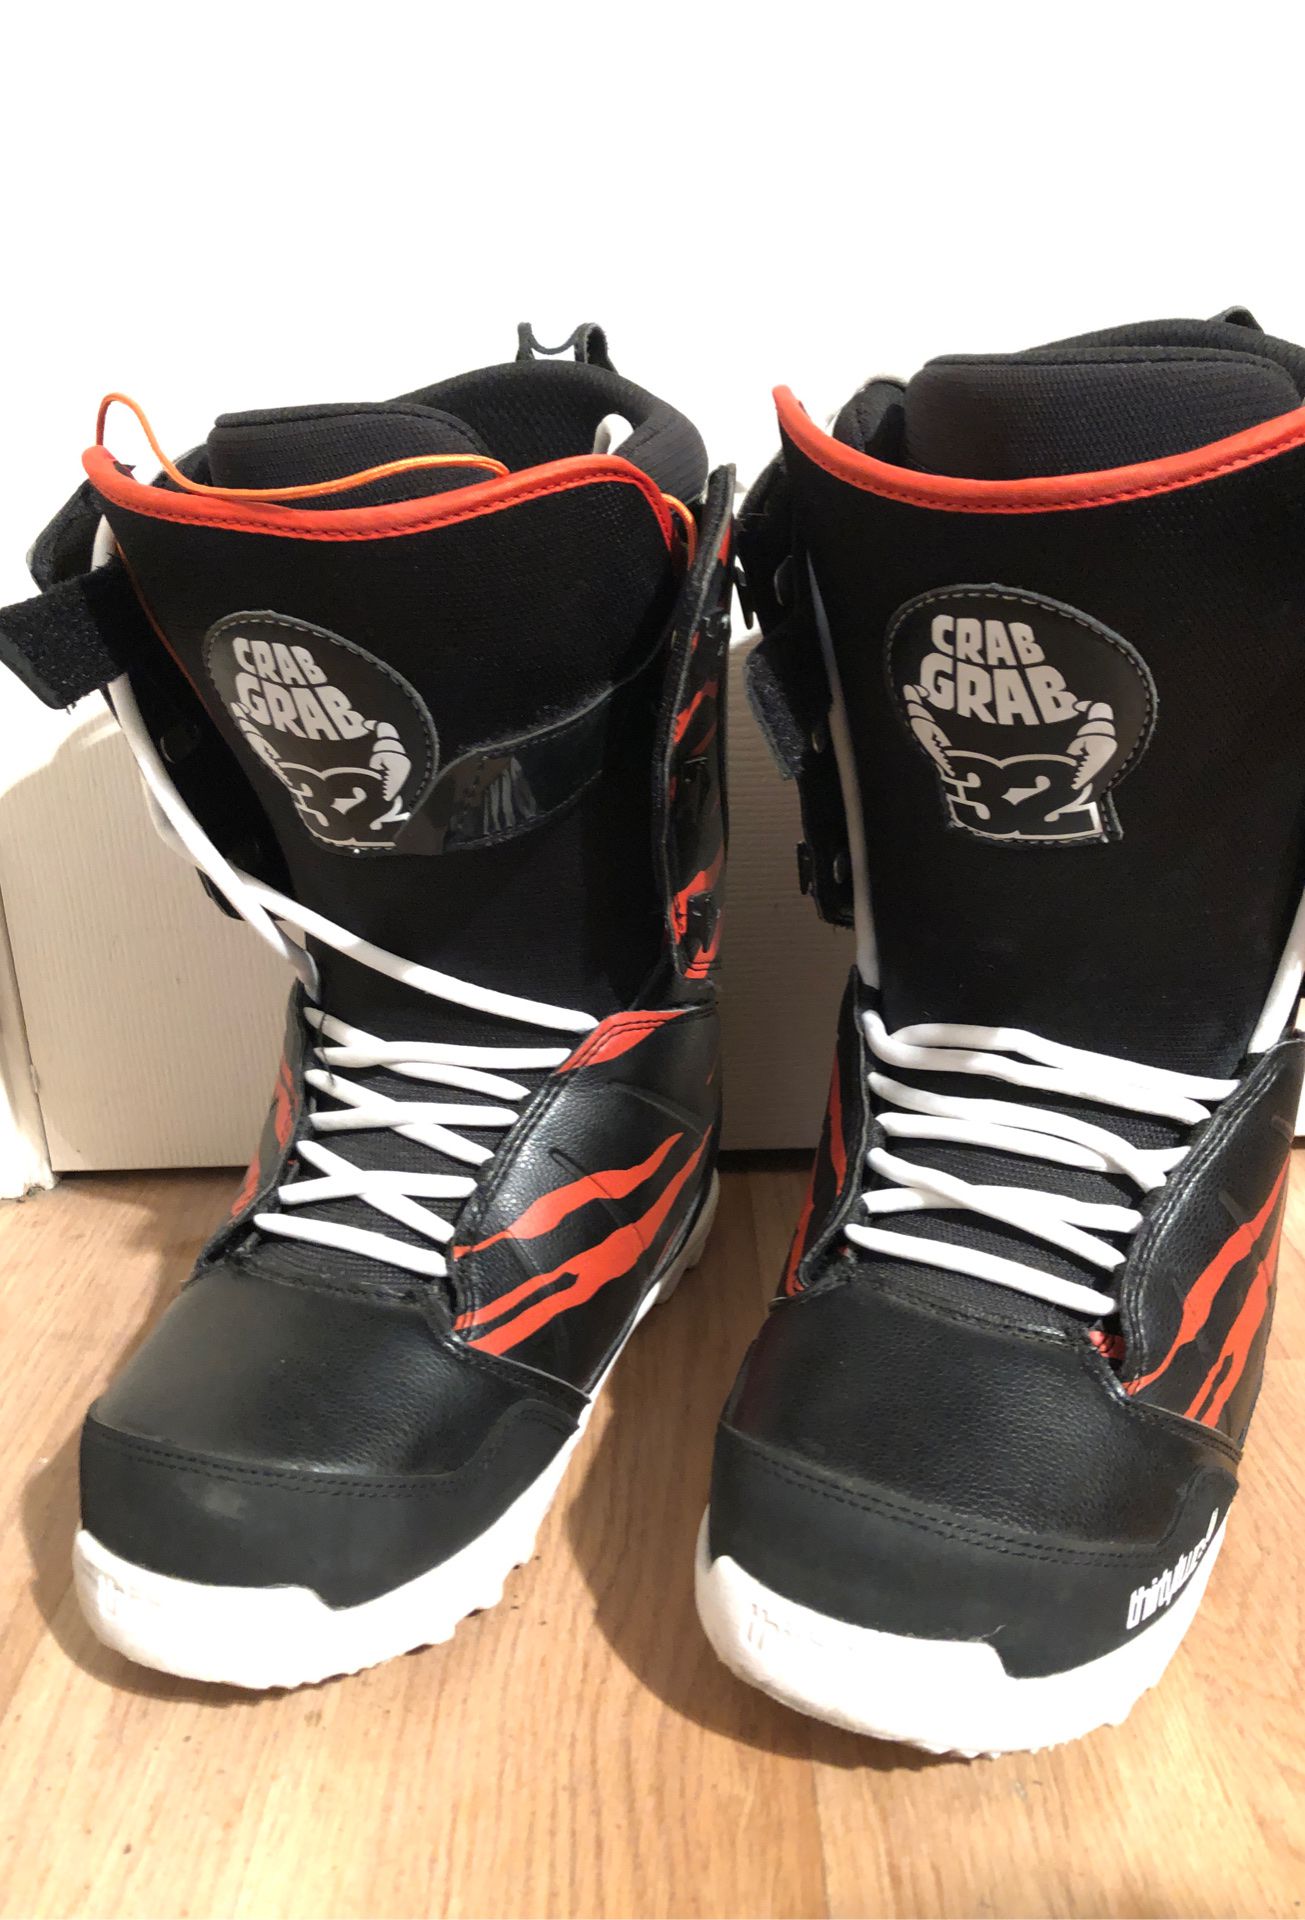 Men’ Snowboard Boots Thirtytwo size 8.5 Lashed Crab Grab